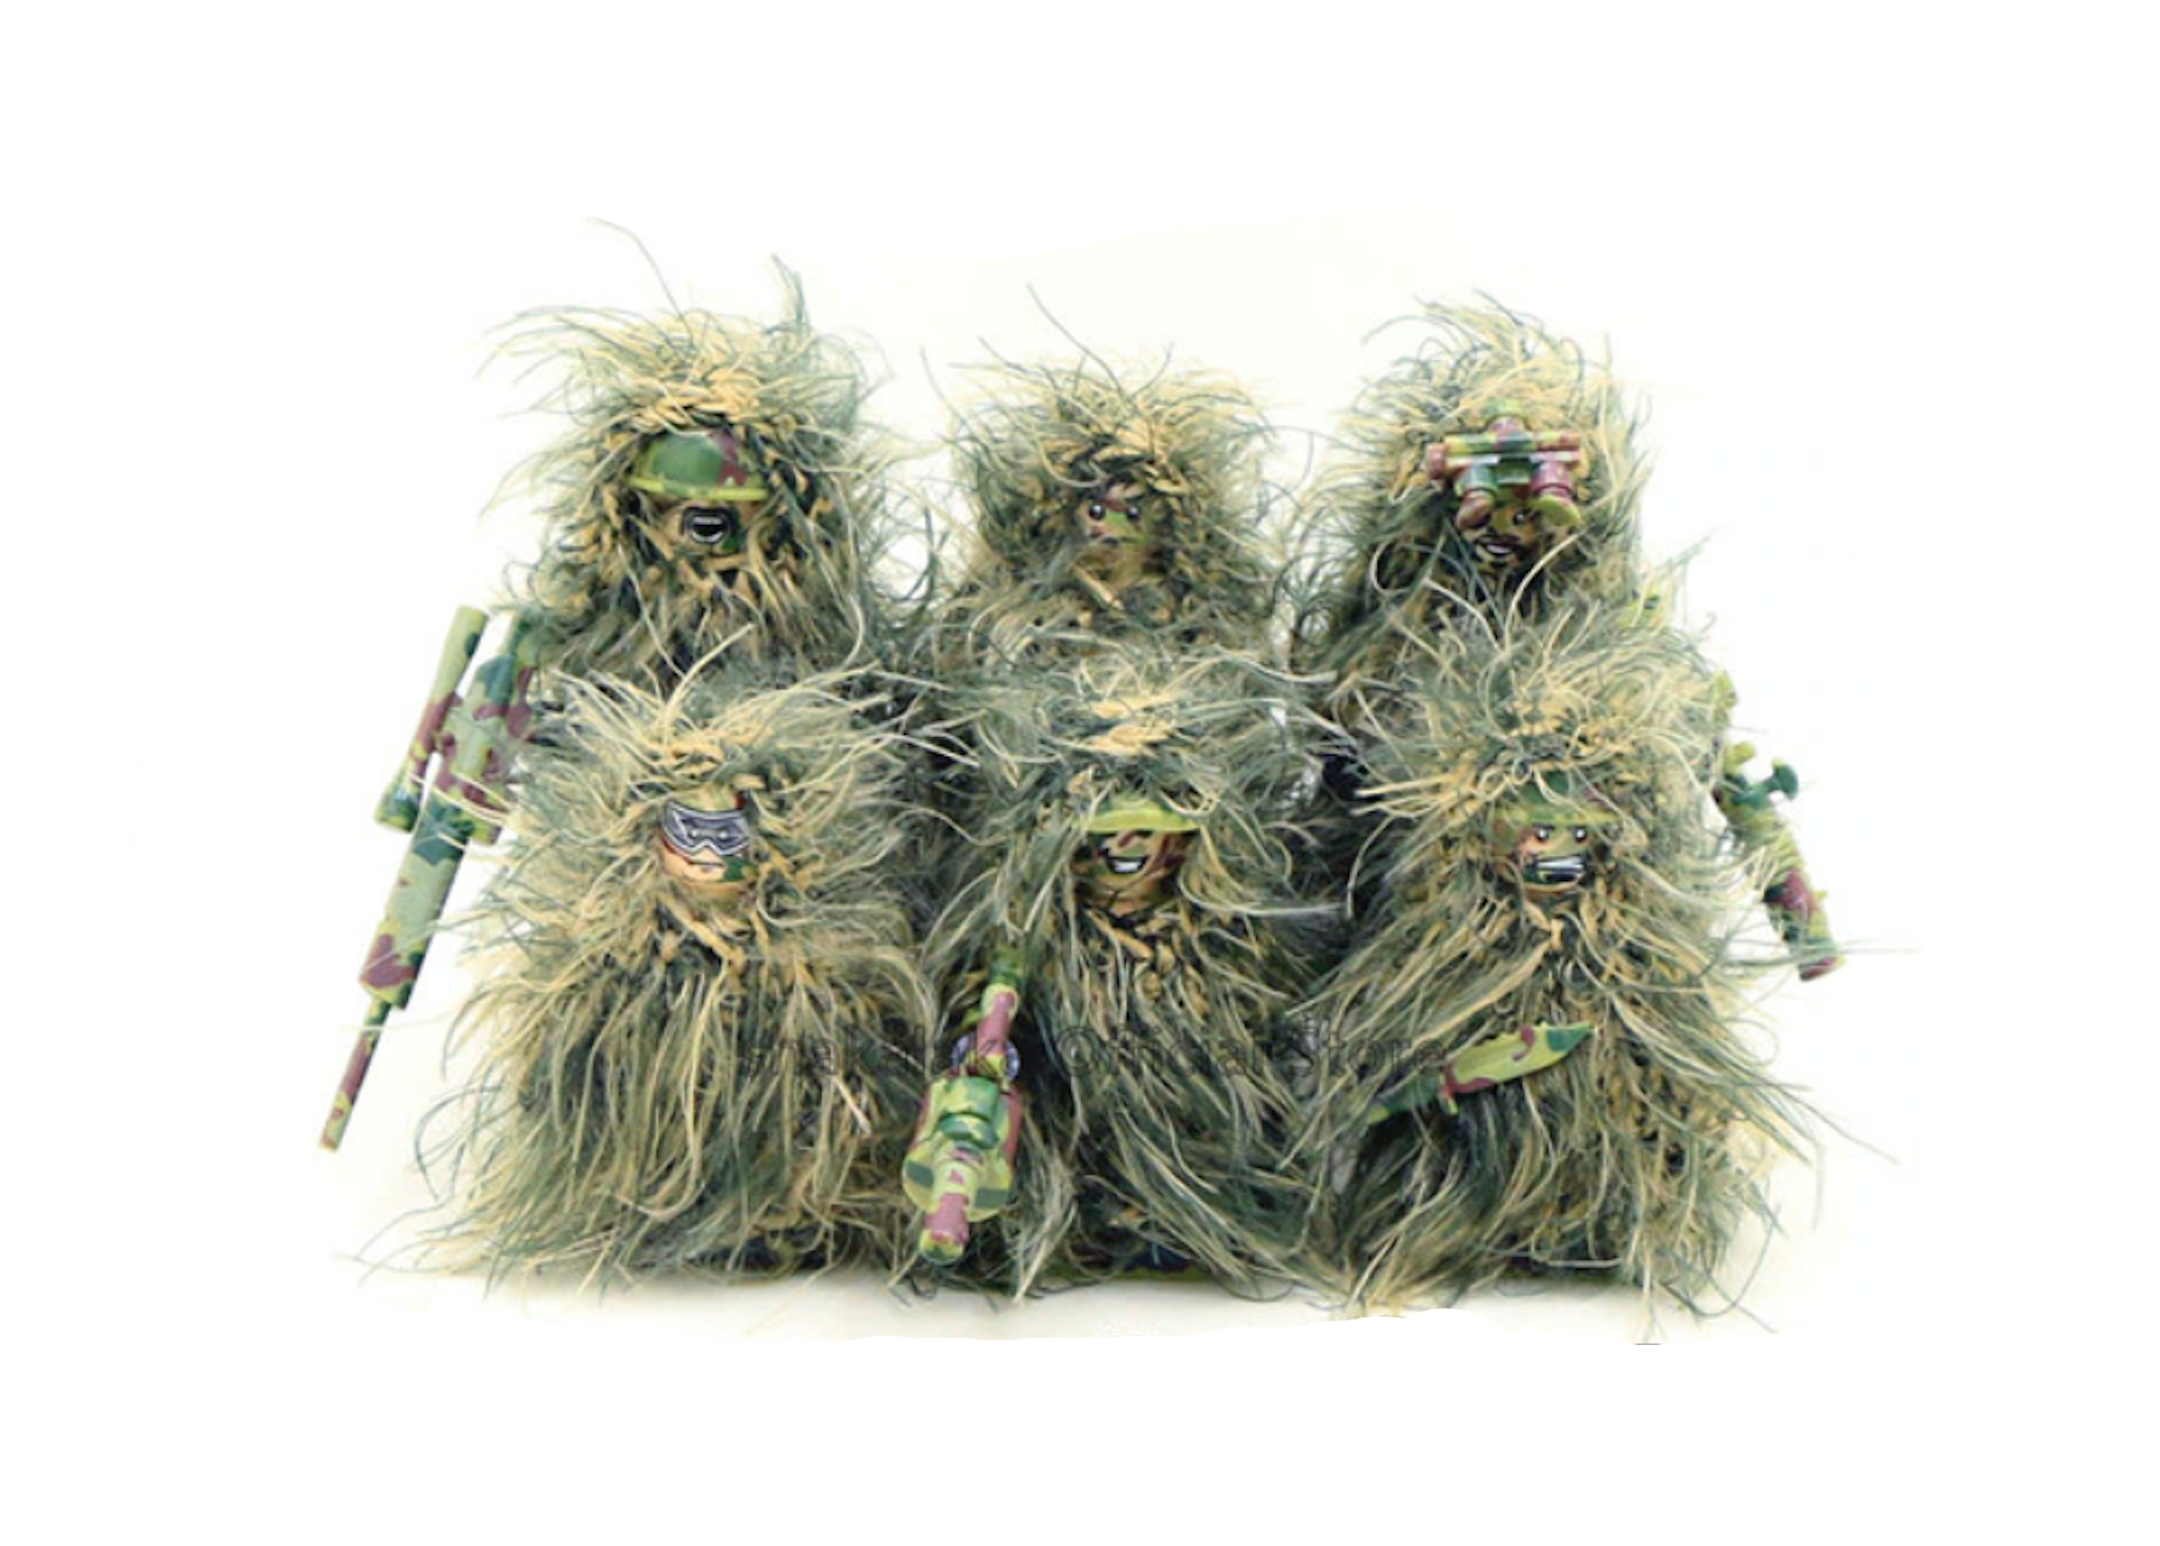 U.S. Marine Scout Snipers - Ghillie Suit Team (6 Figures)